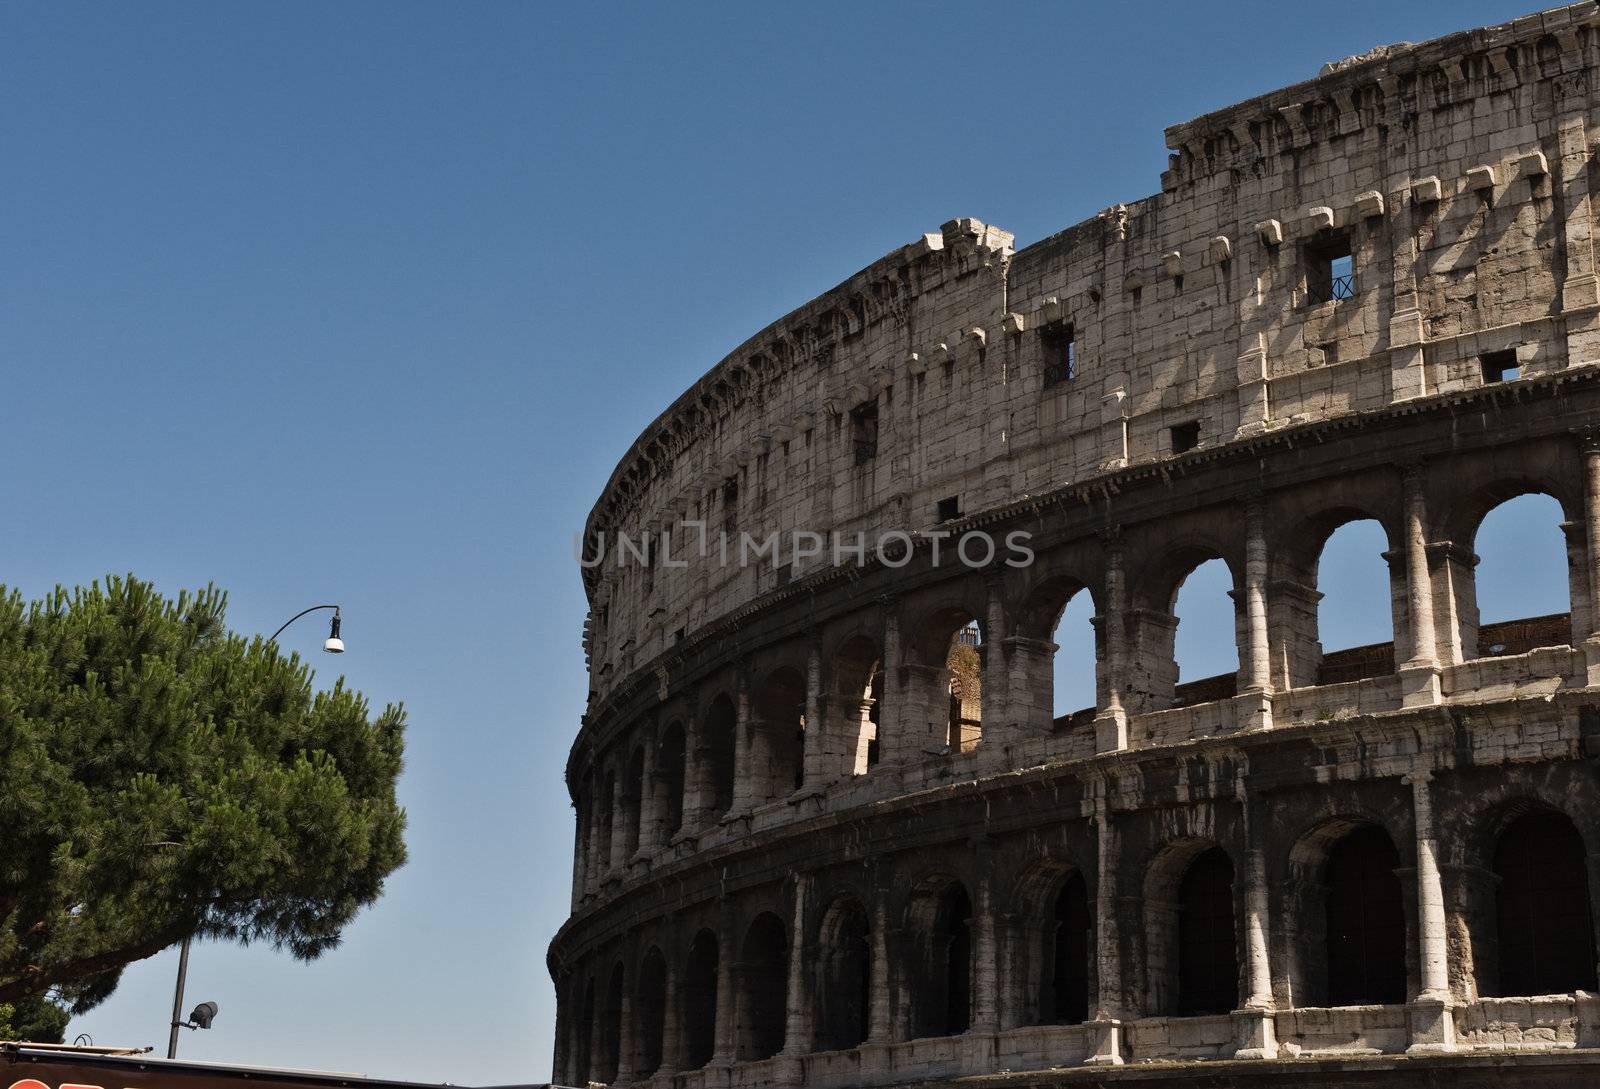 Colosseum, Rome, Italy by fljac